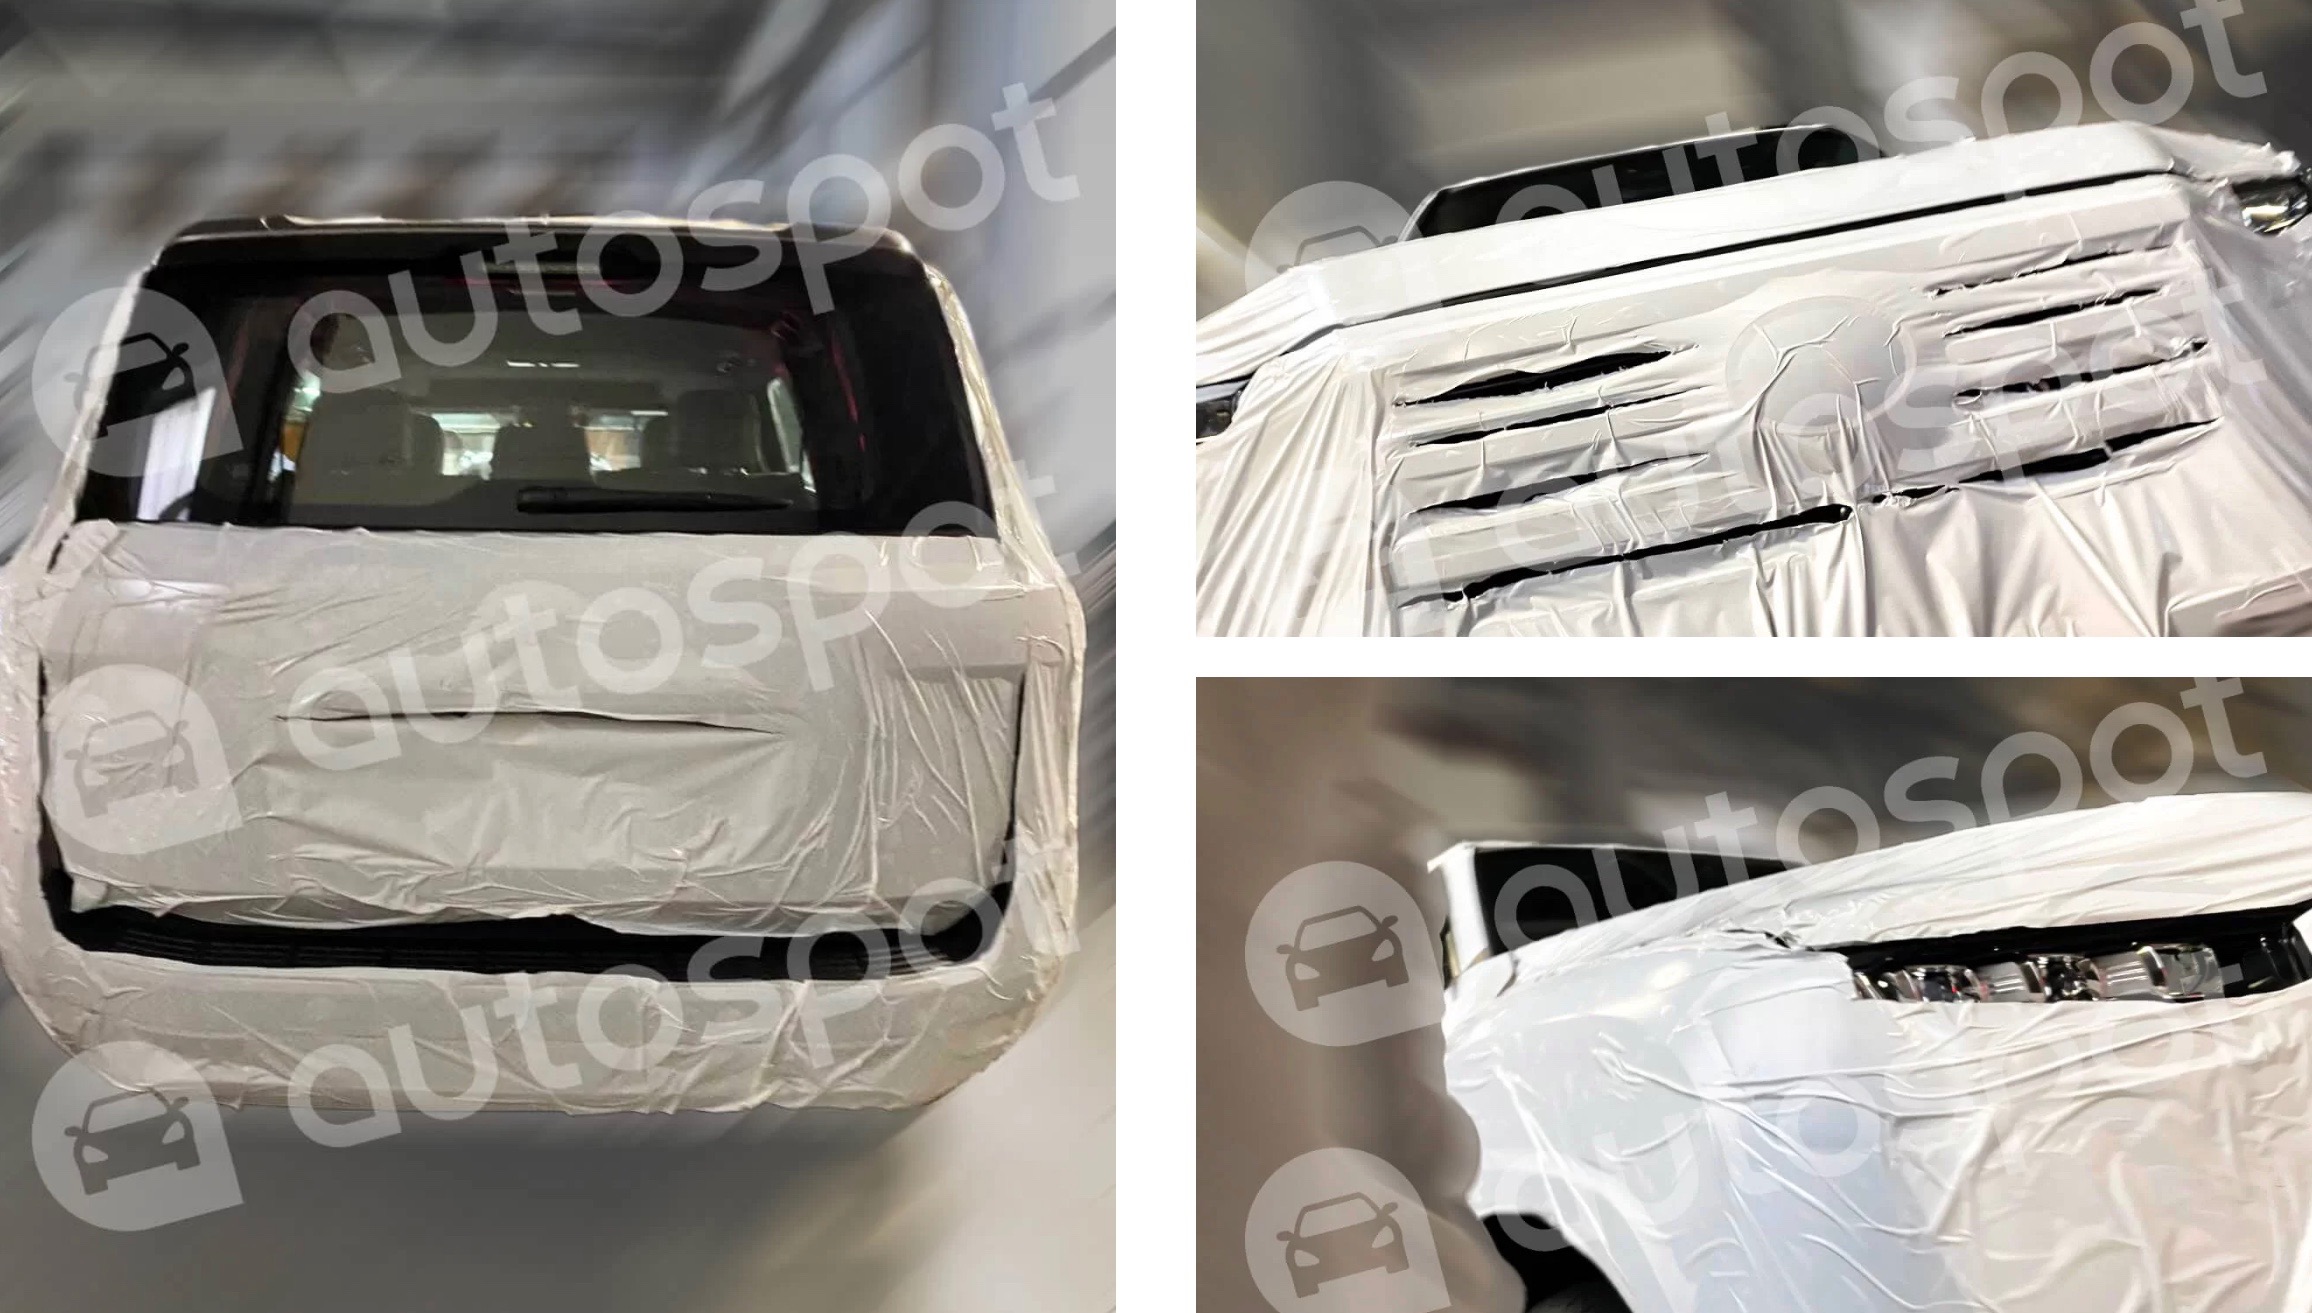 2021 Toyota LandCruiser 300 Series spied, inside and out